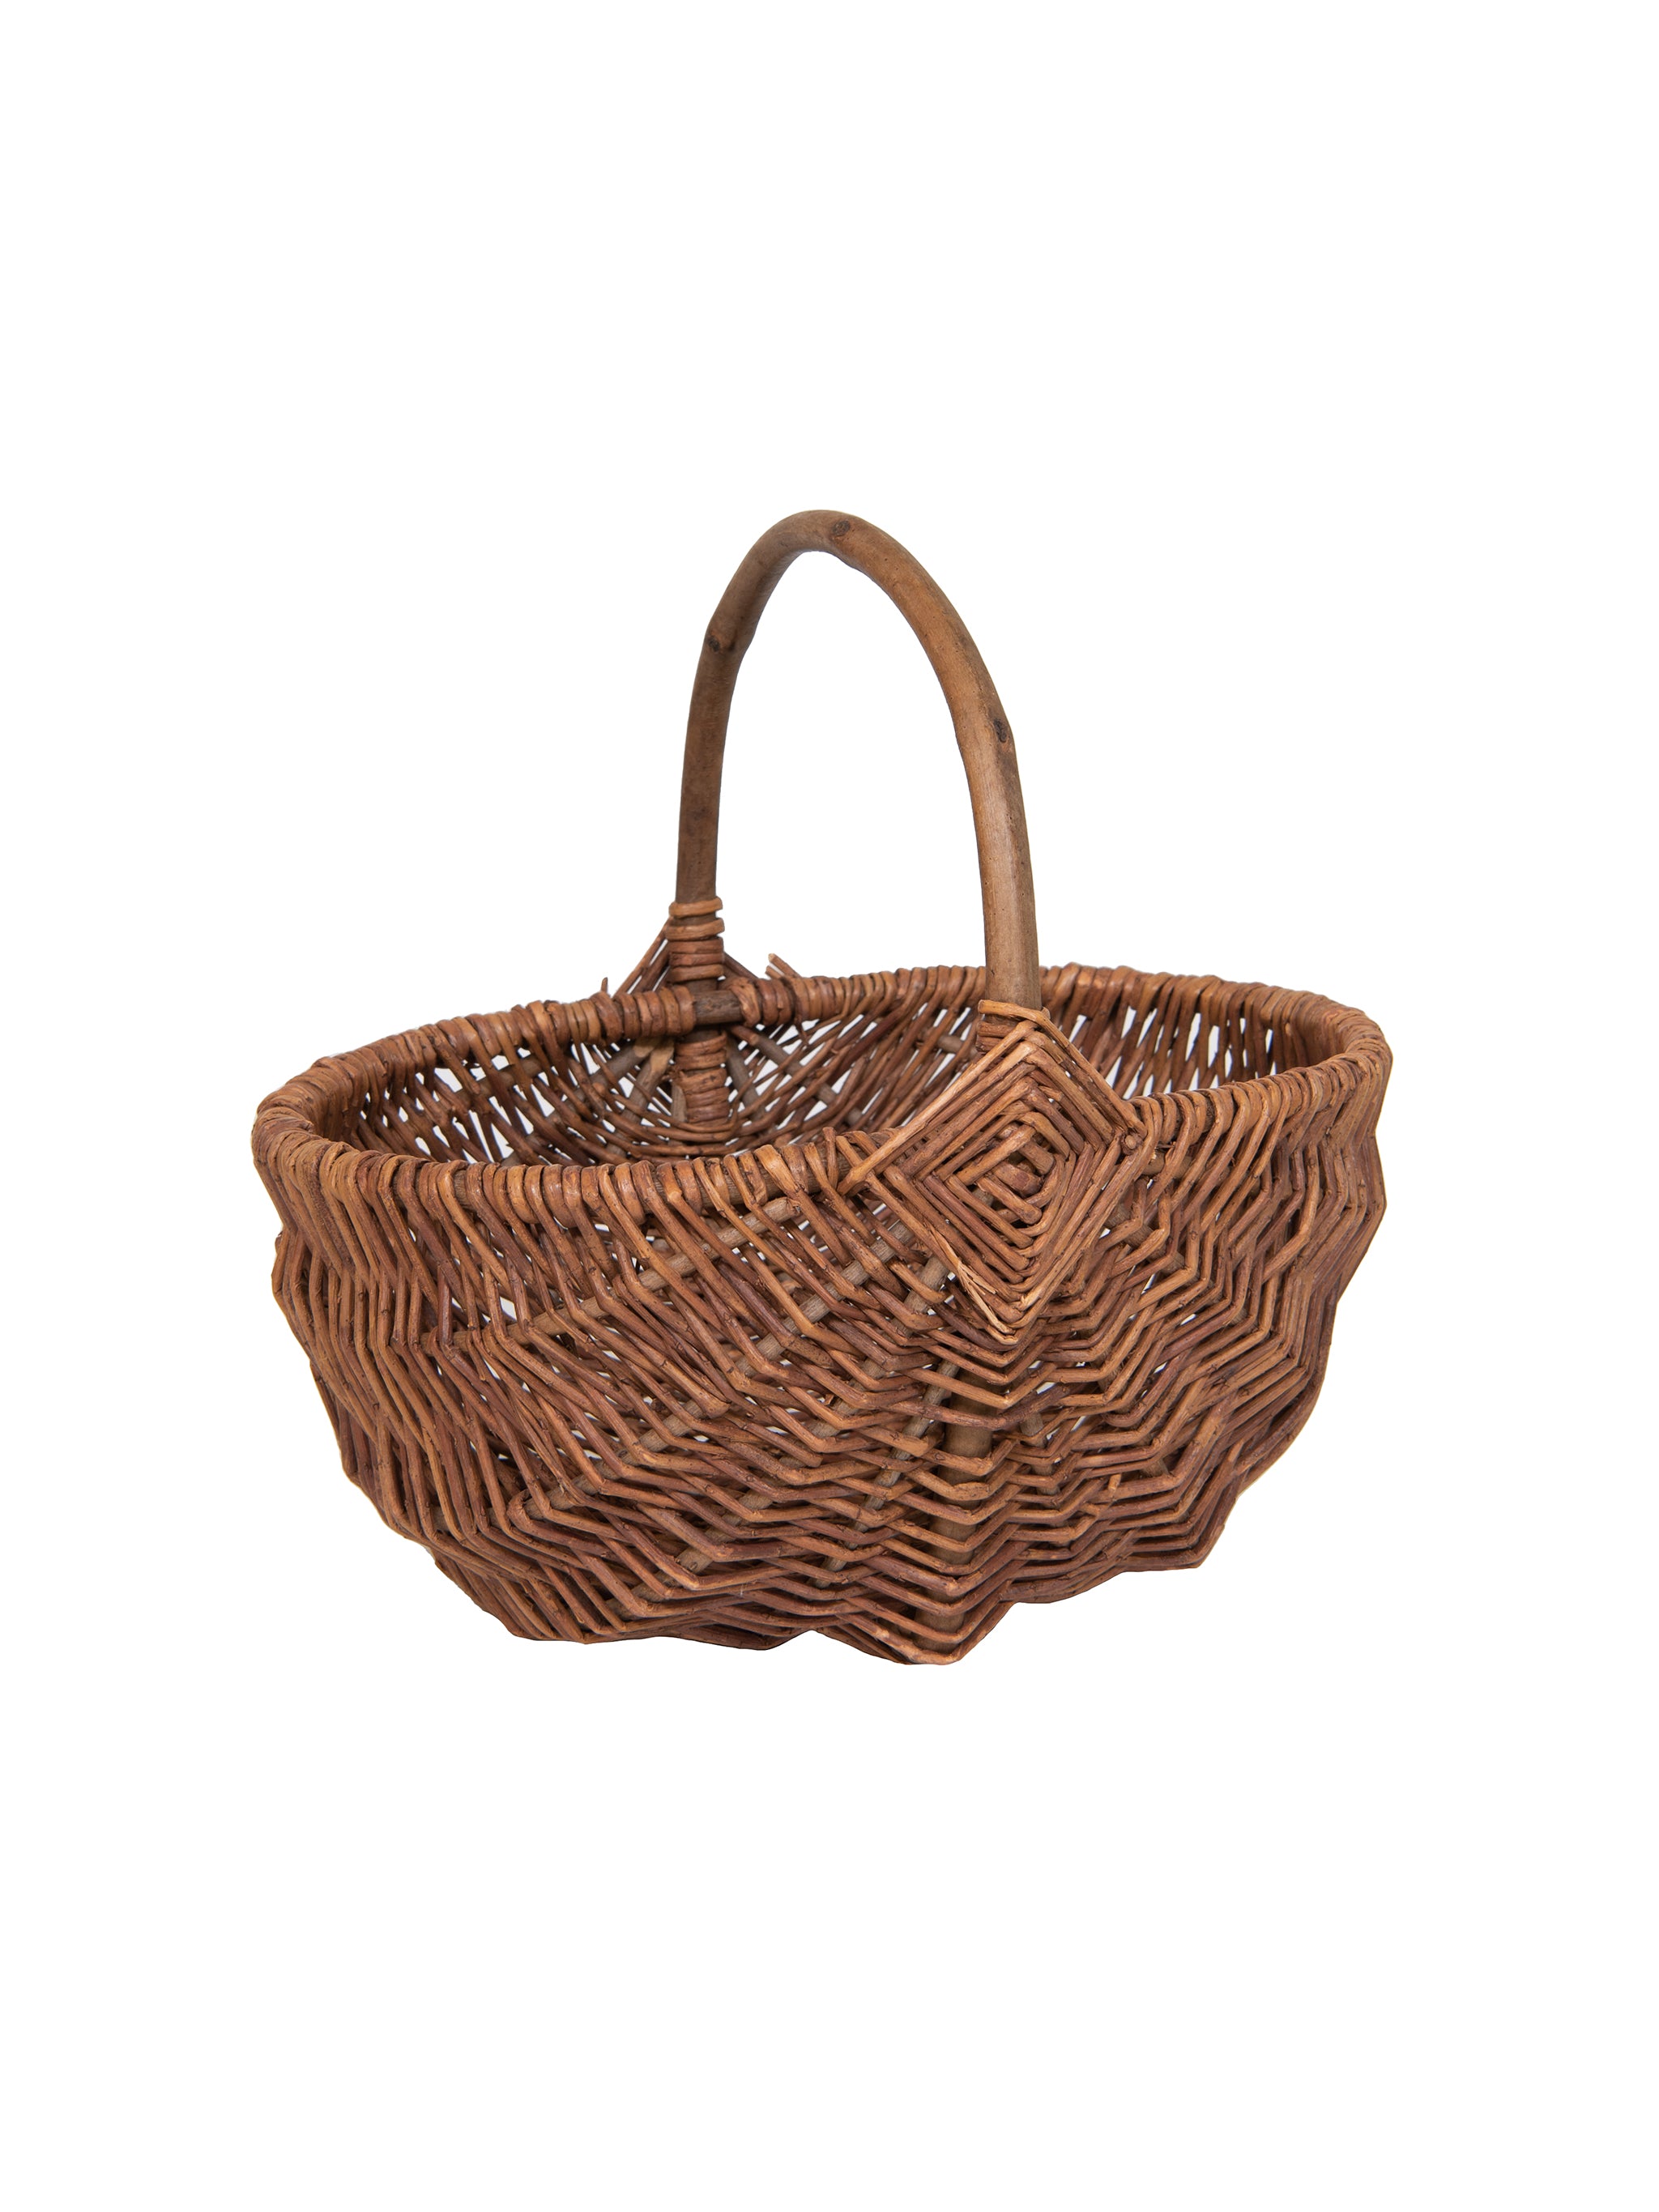 Shop the Vintage 1950s French Rustic Foraging Basket at Weston Table